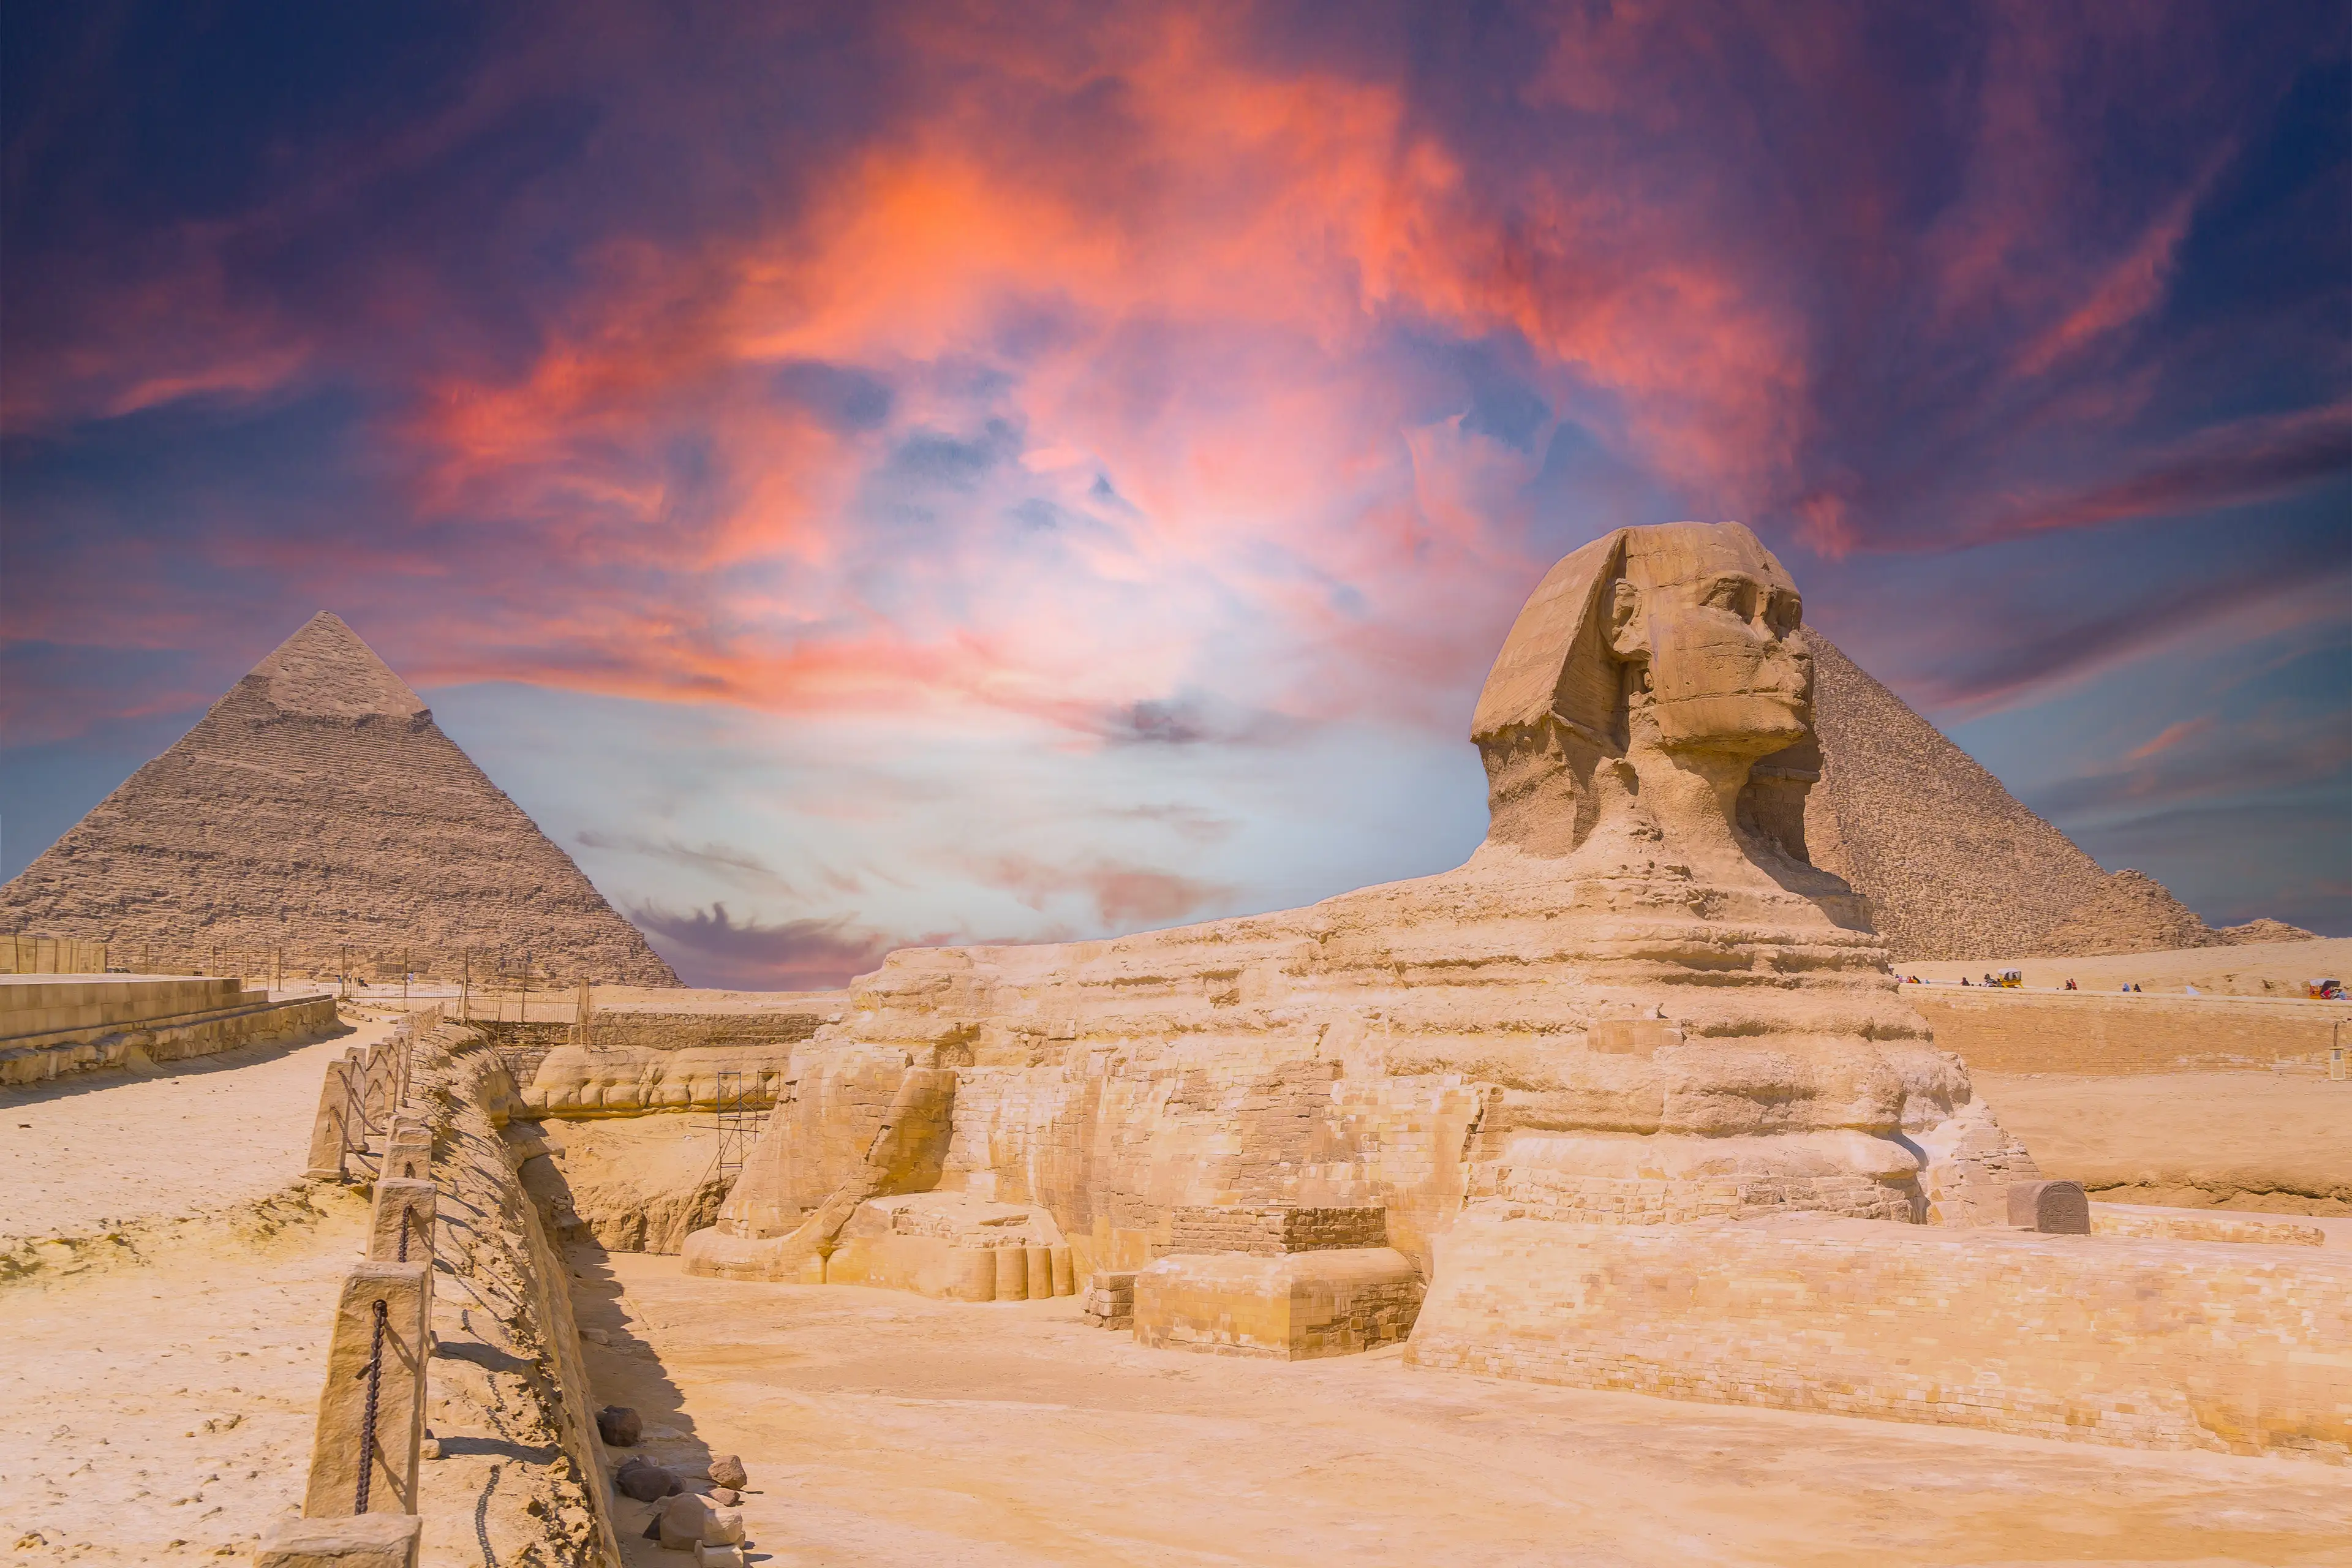 The Great Sphinx of Giza and in the background the Pyramids of Giza at sunset, the oldest funerary monument in the world.